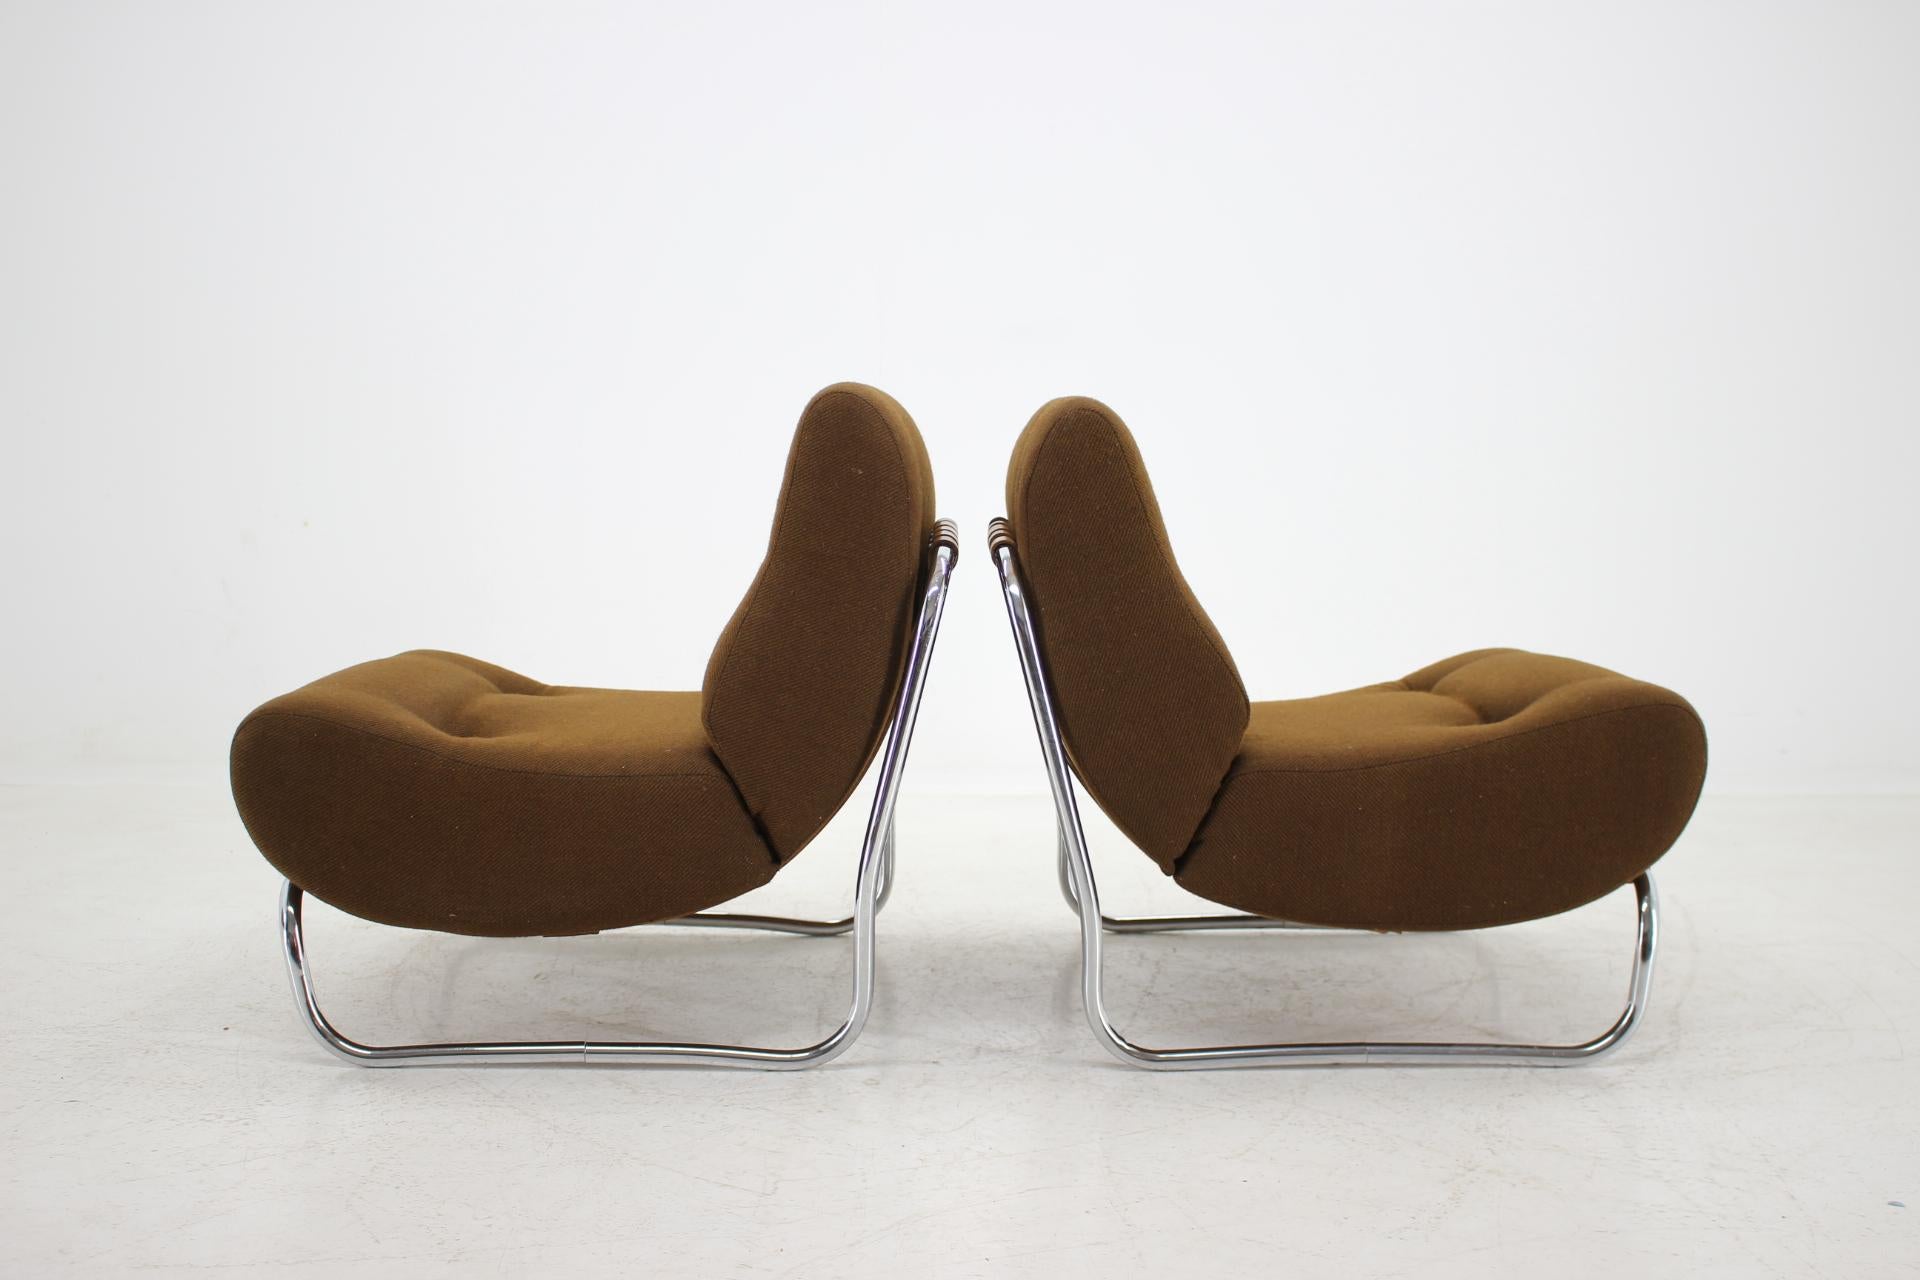 Late 20th Century Pair of German Lounge Chairs, 1970